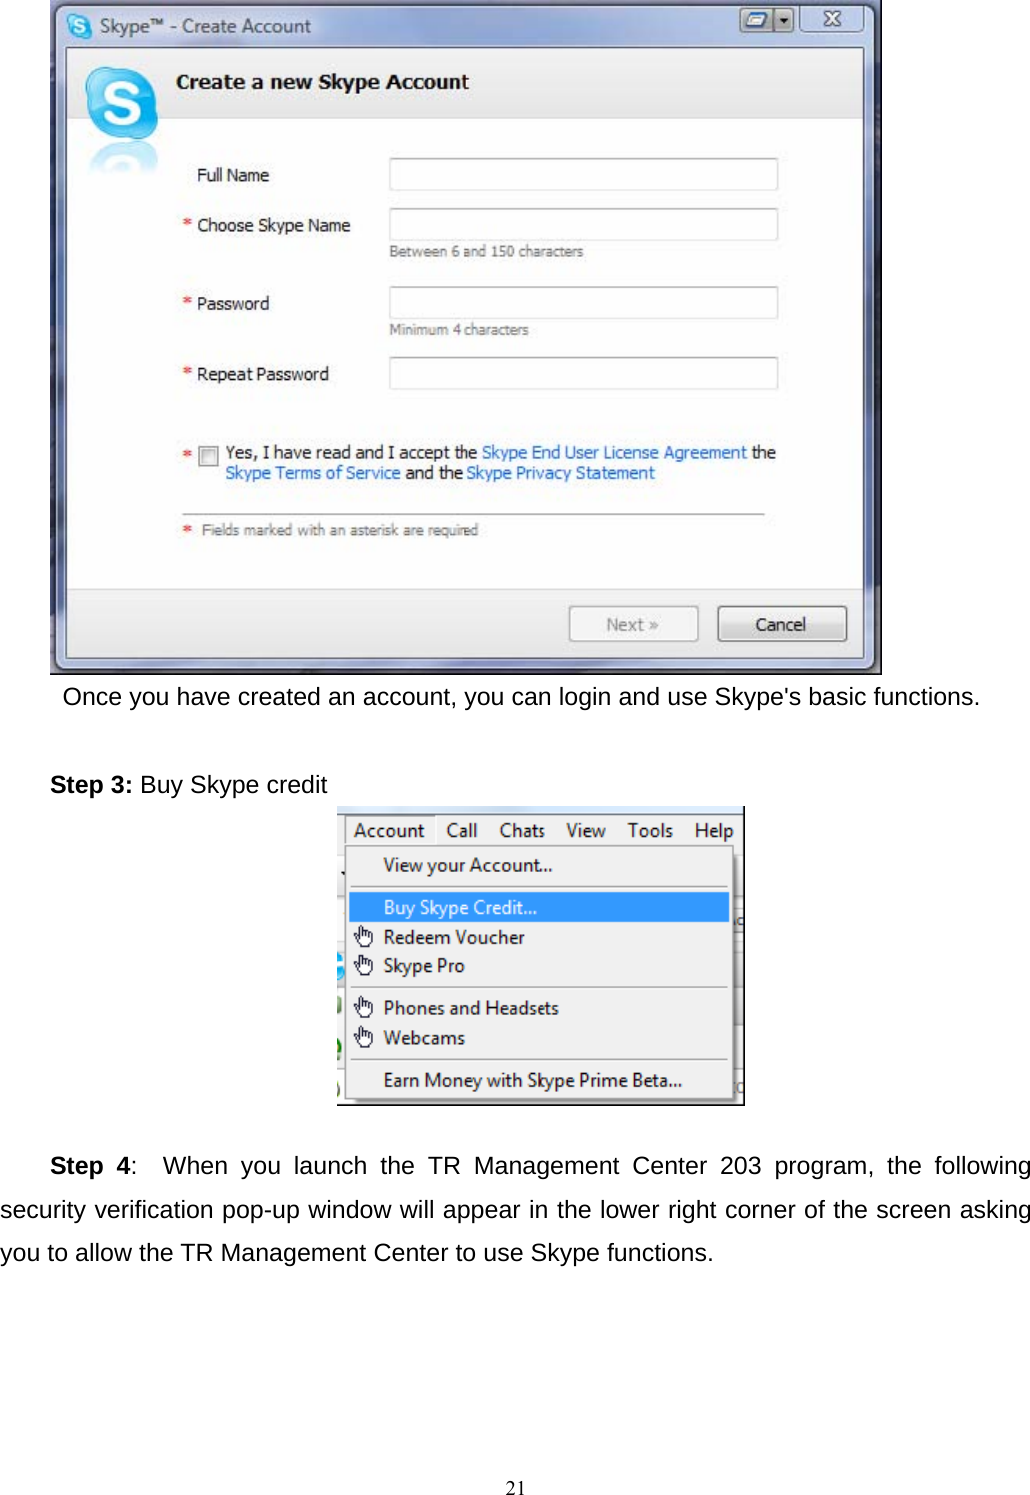    Once you have created an account, you can login and use Skype&apos;s basic functions.    Step 3: Buy Skype credit   Step 4:  When you launch the TR Management Center 203 program, the following security verification pop-up window will appear in the lower right corner of the screen asking you to allow the TR Management Center to use Skype functions.     21